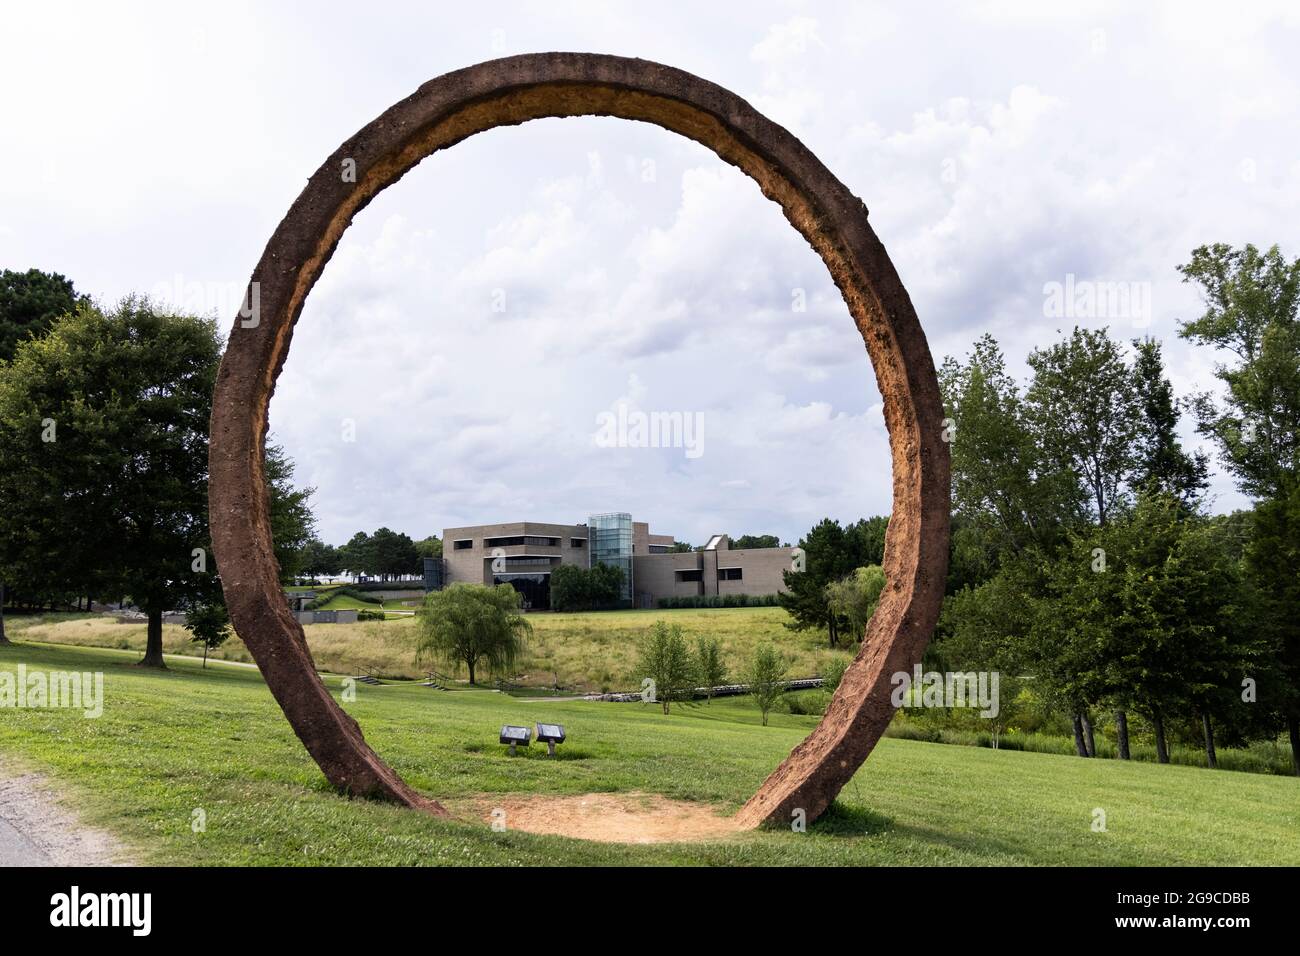 The North Carolina Museum of Art in Raleigh, NC, USA, as viewed through one of the circles of Thomas Sayre's large sculpture Gyre. Stock Photo